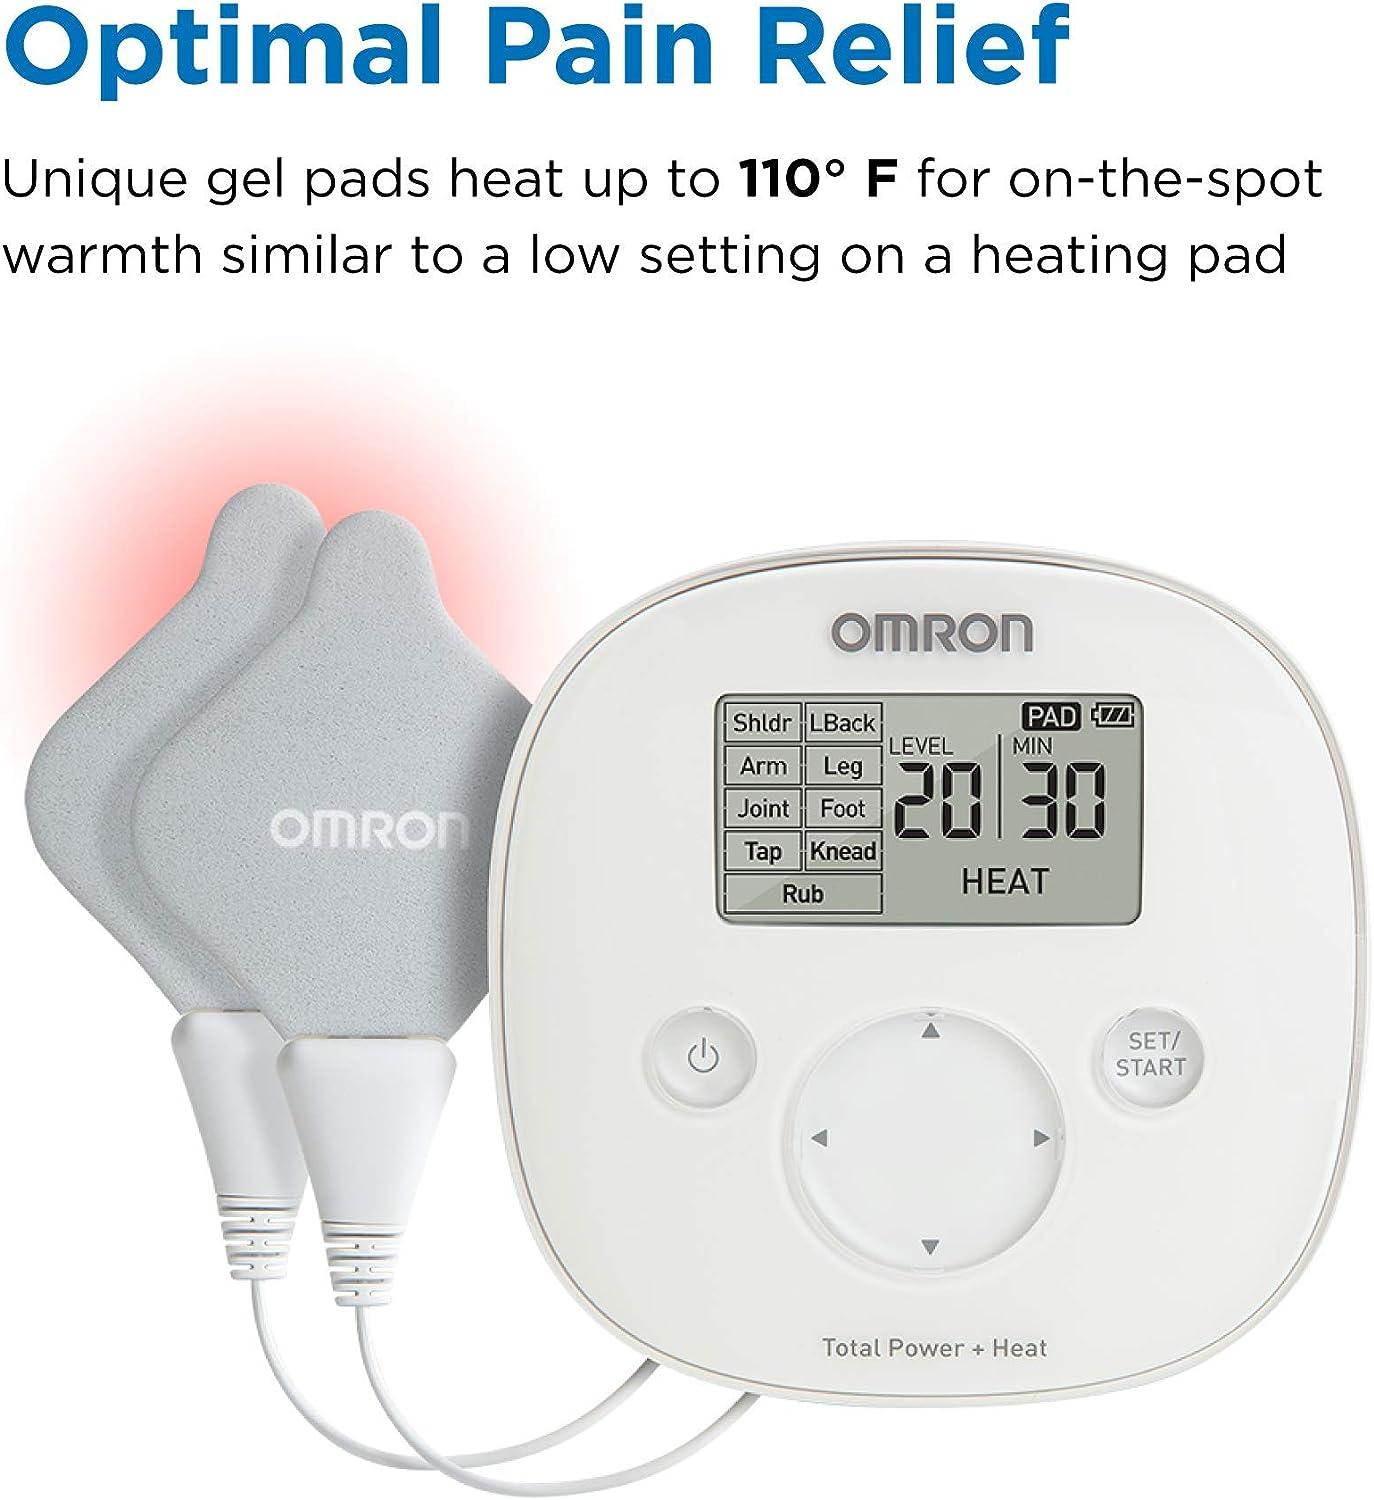 Omron Max Power Relief Tens Unit